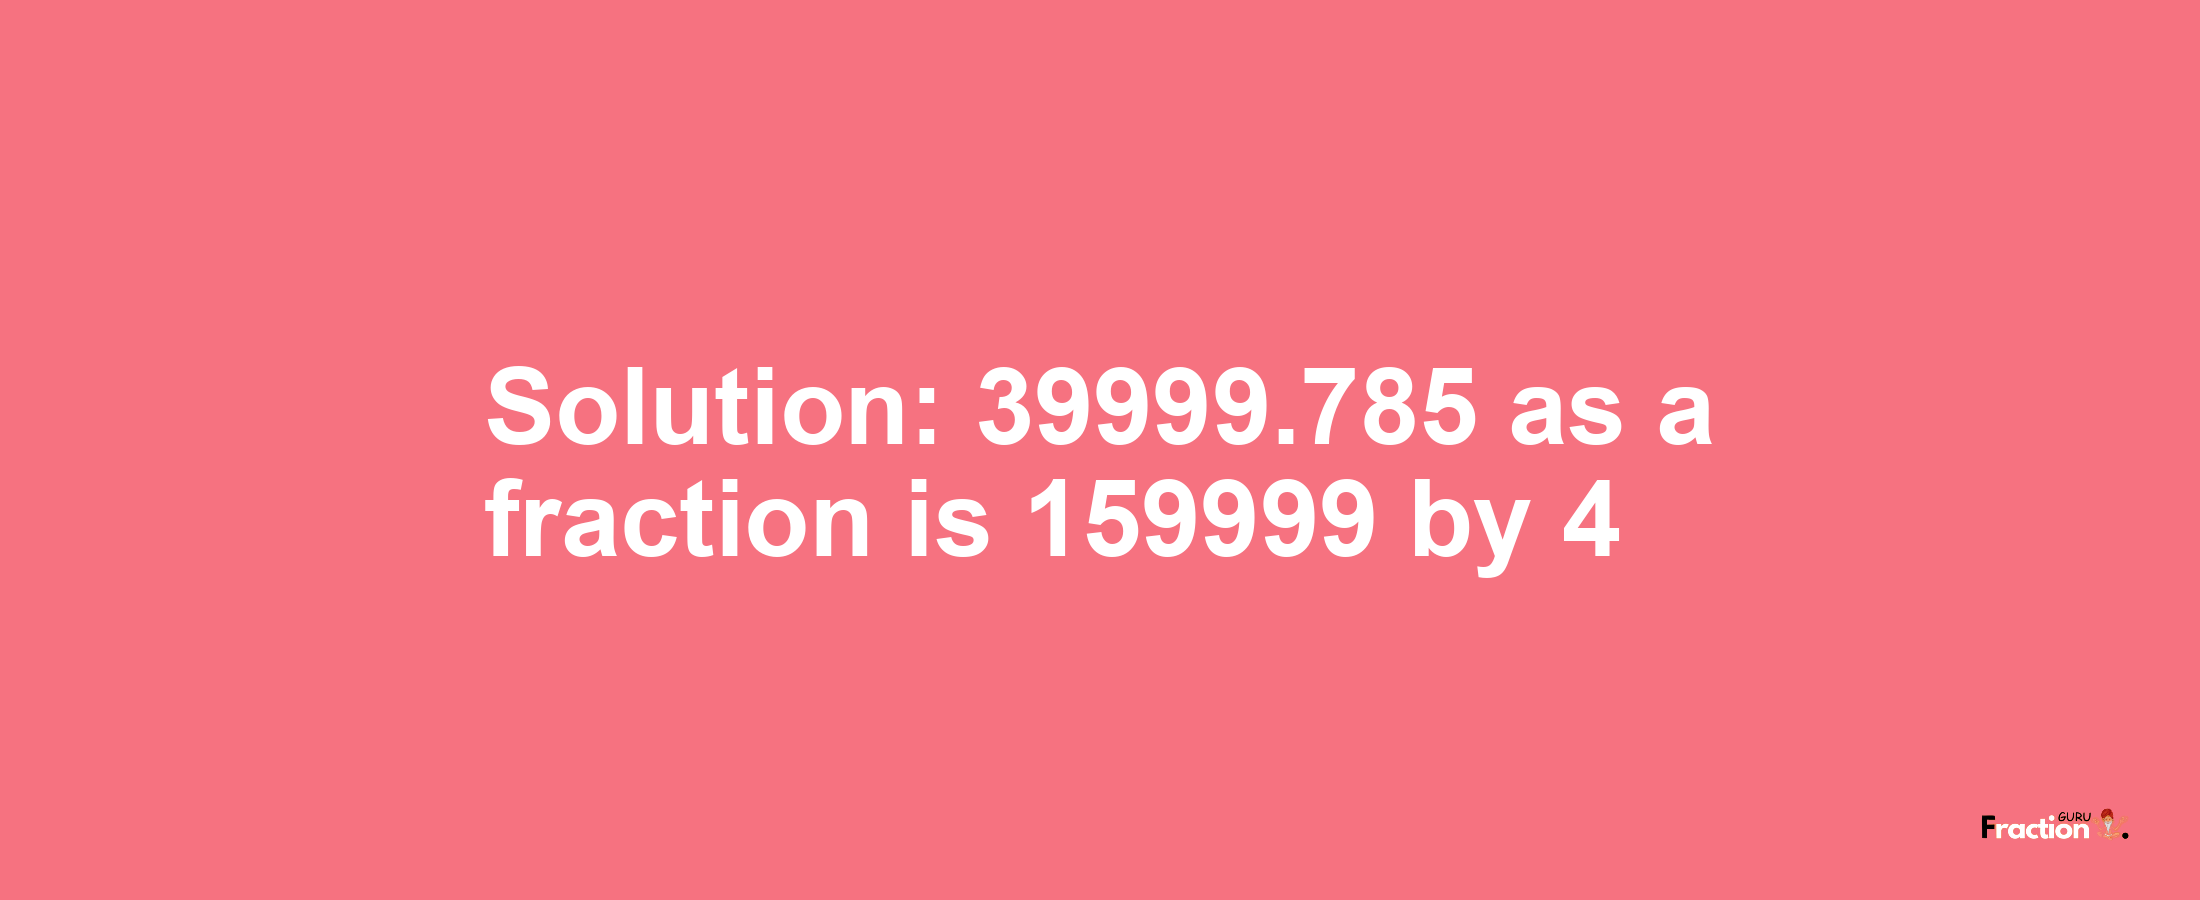 Solution:39999.785 as a fraction is 159999/4